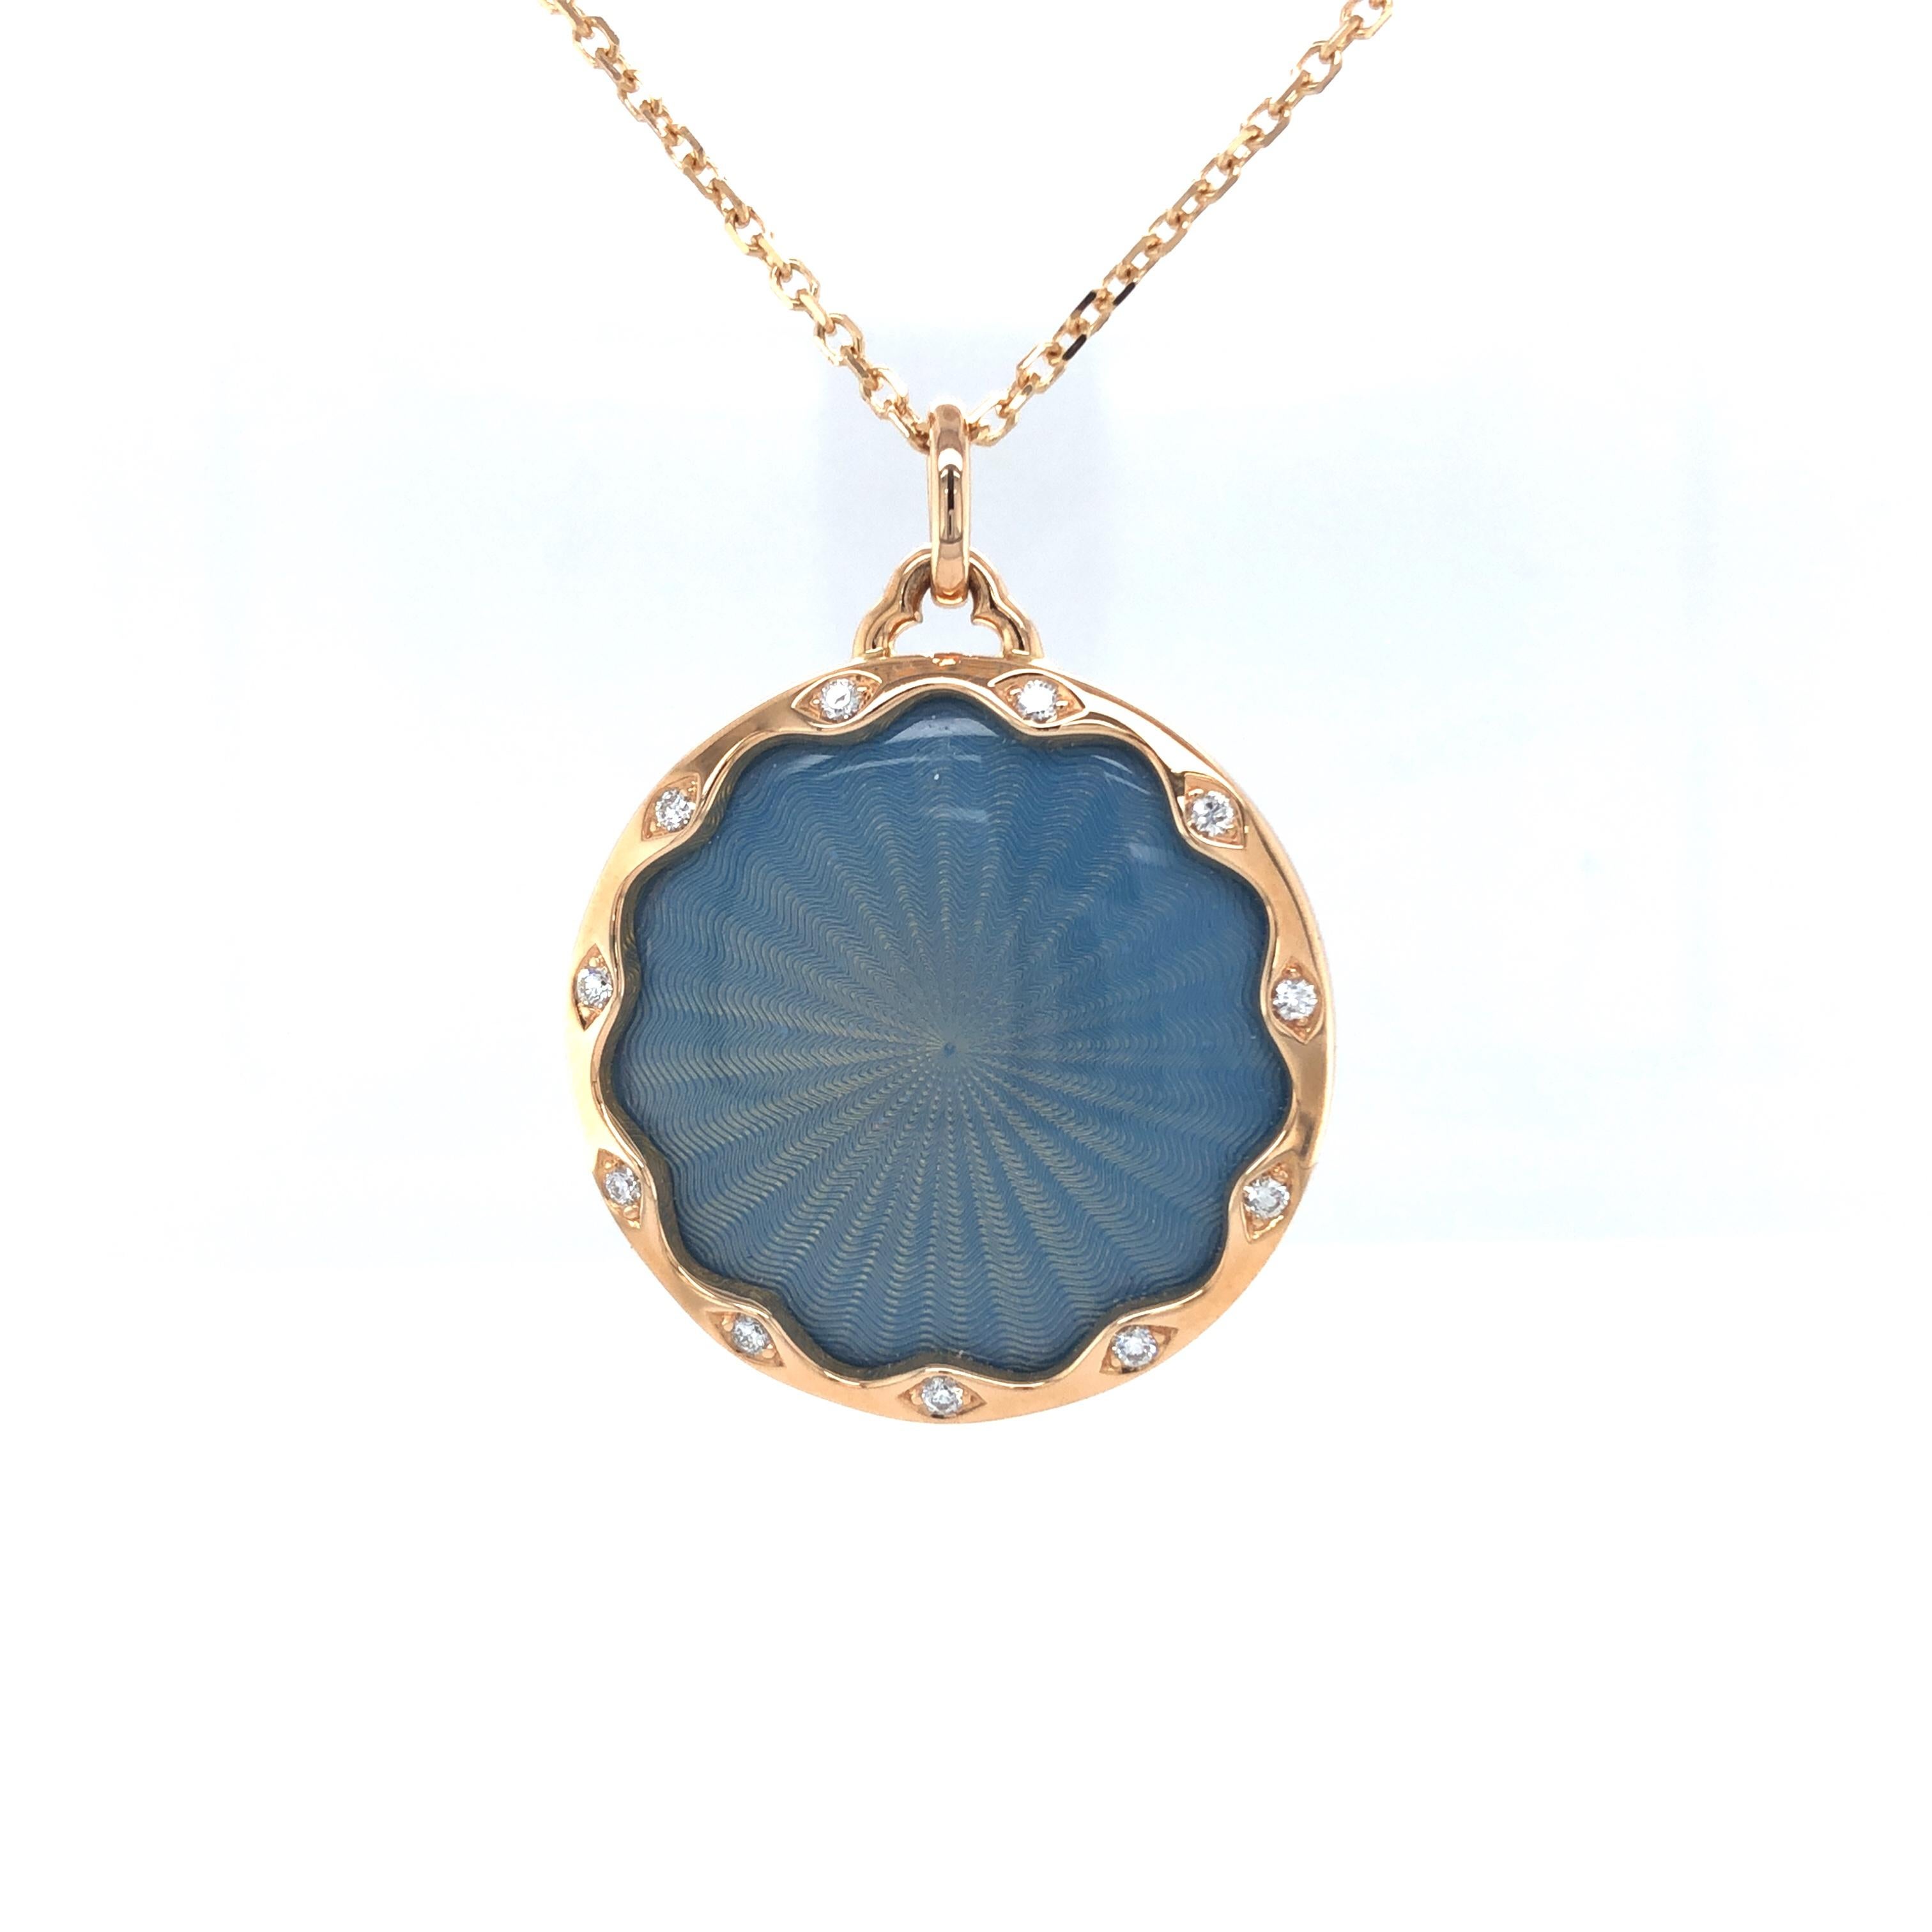 Victor Mayer pendant 18k rose gold, Macaron collection, blue vitreous enamel, manual guilloché engraving, 11 diamonds, total 0.16 ct, G VS brilliant cut, diameter 27.2 mm, limited edition

About the creator Victor Mayer
Victor Mayer is